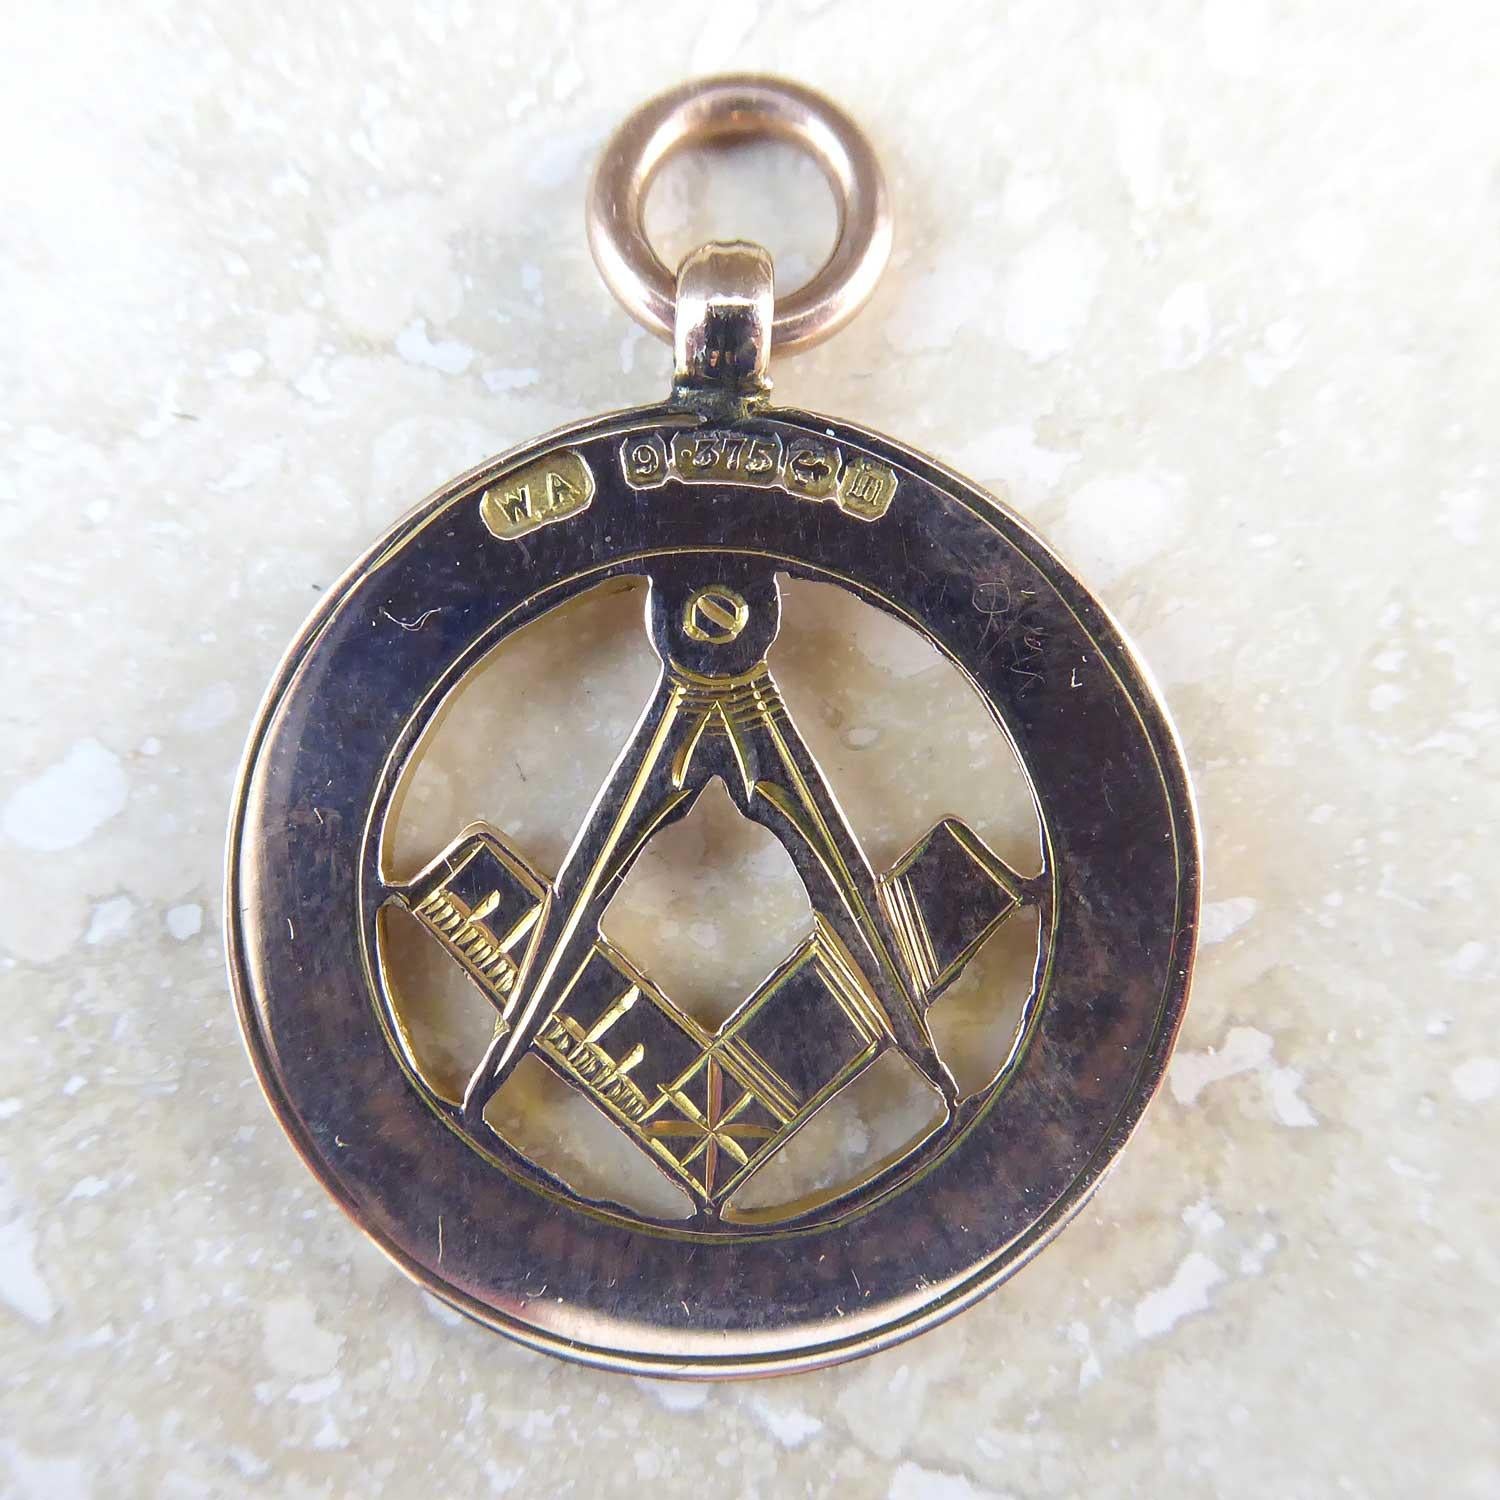 An antique gold watch chain fob dating from 1911.  The centre of the fob depicts the Freemason signs of the square and compass set within an outer border 1/8th of an inch wide and handsomly engraved with an acanthus leaf design.  The reverse of the